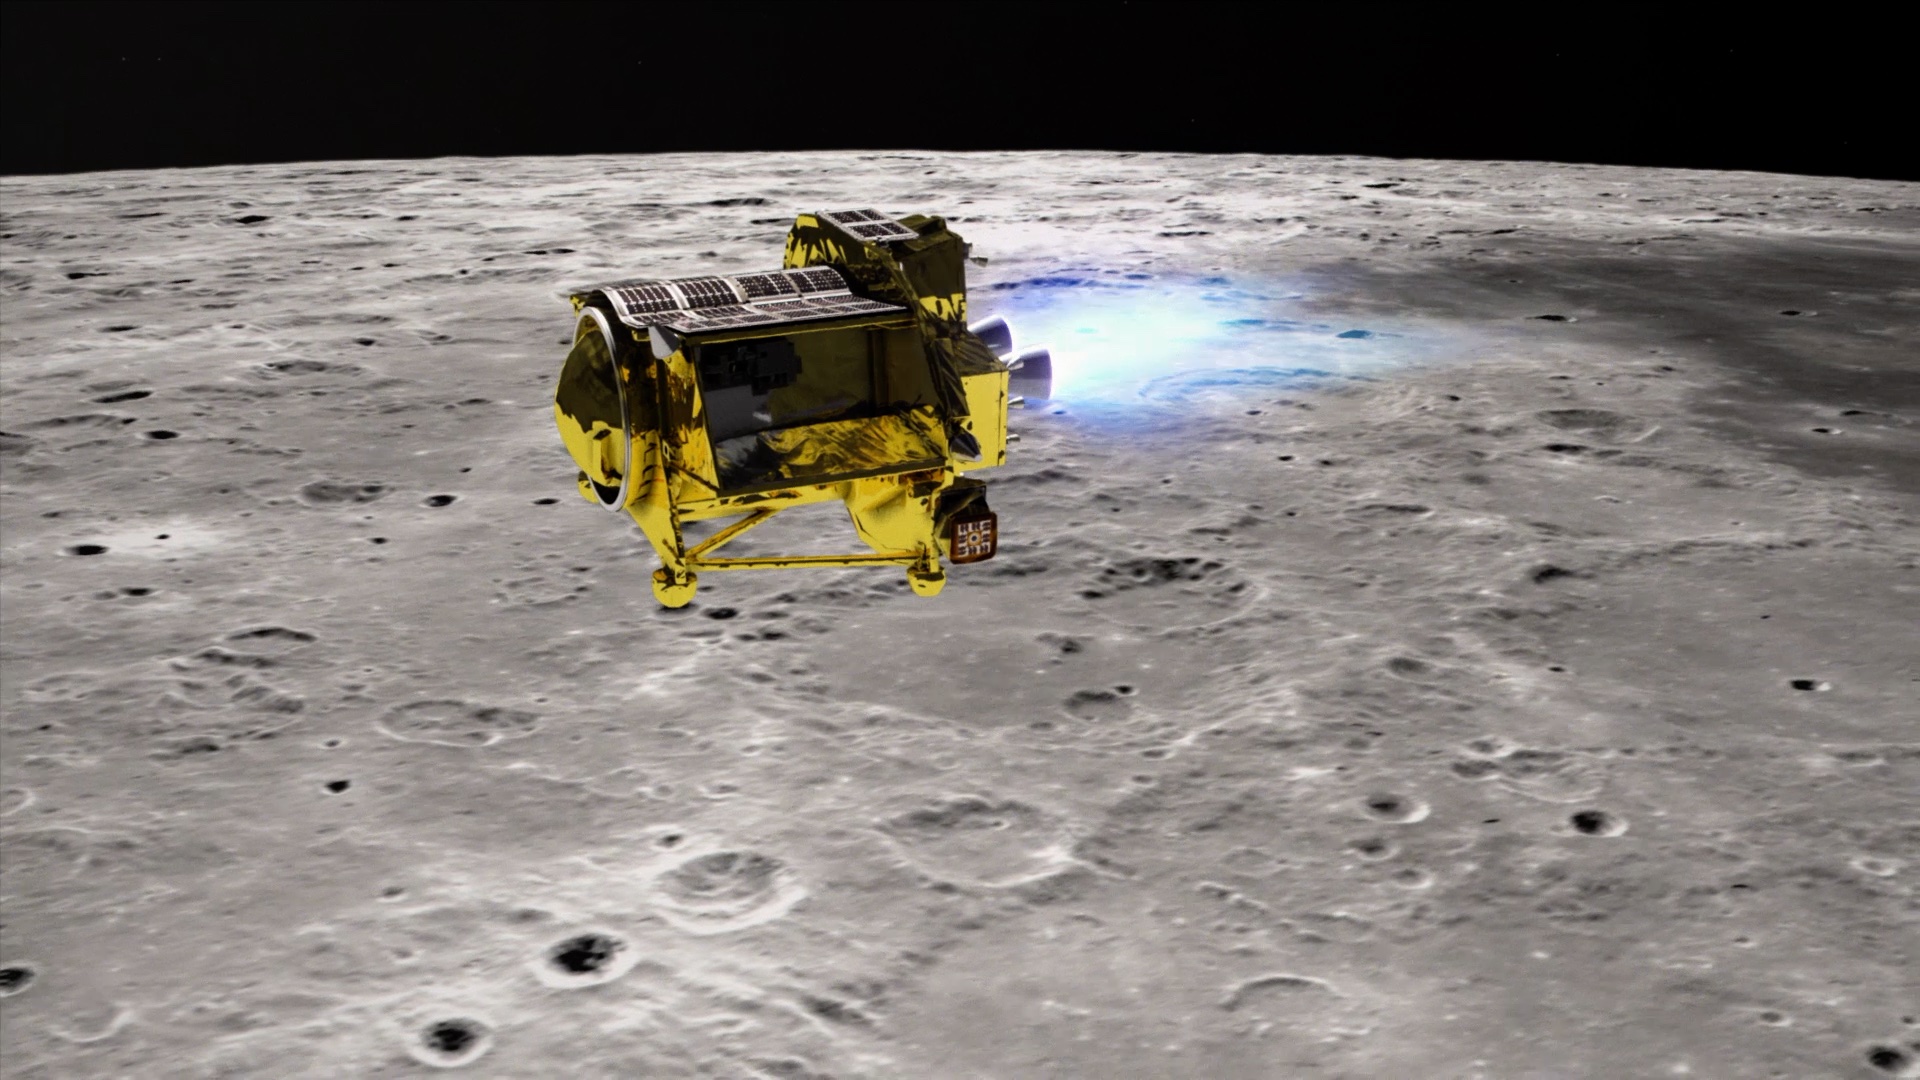 Japan's 'Moon Sniper' lands on lunar surface, but it may be dead within hours thumbnail